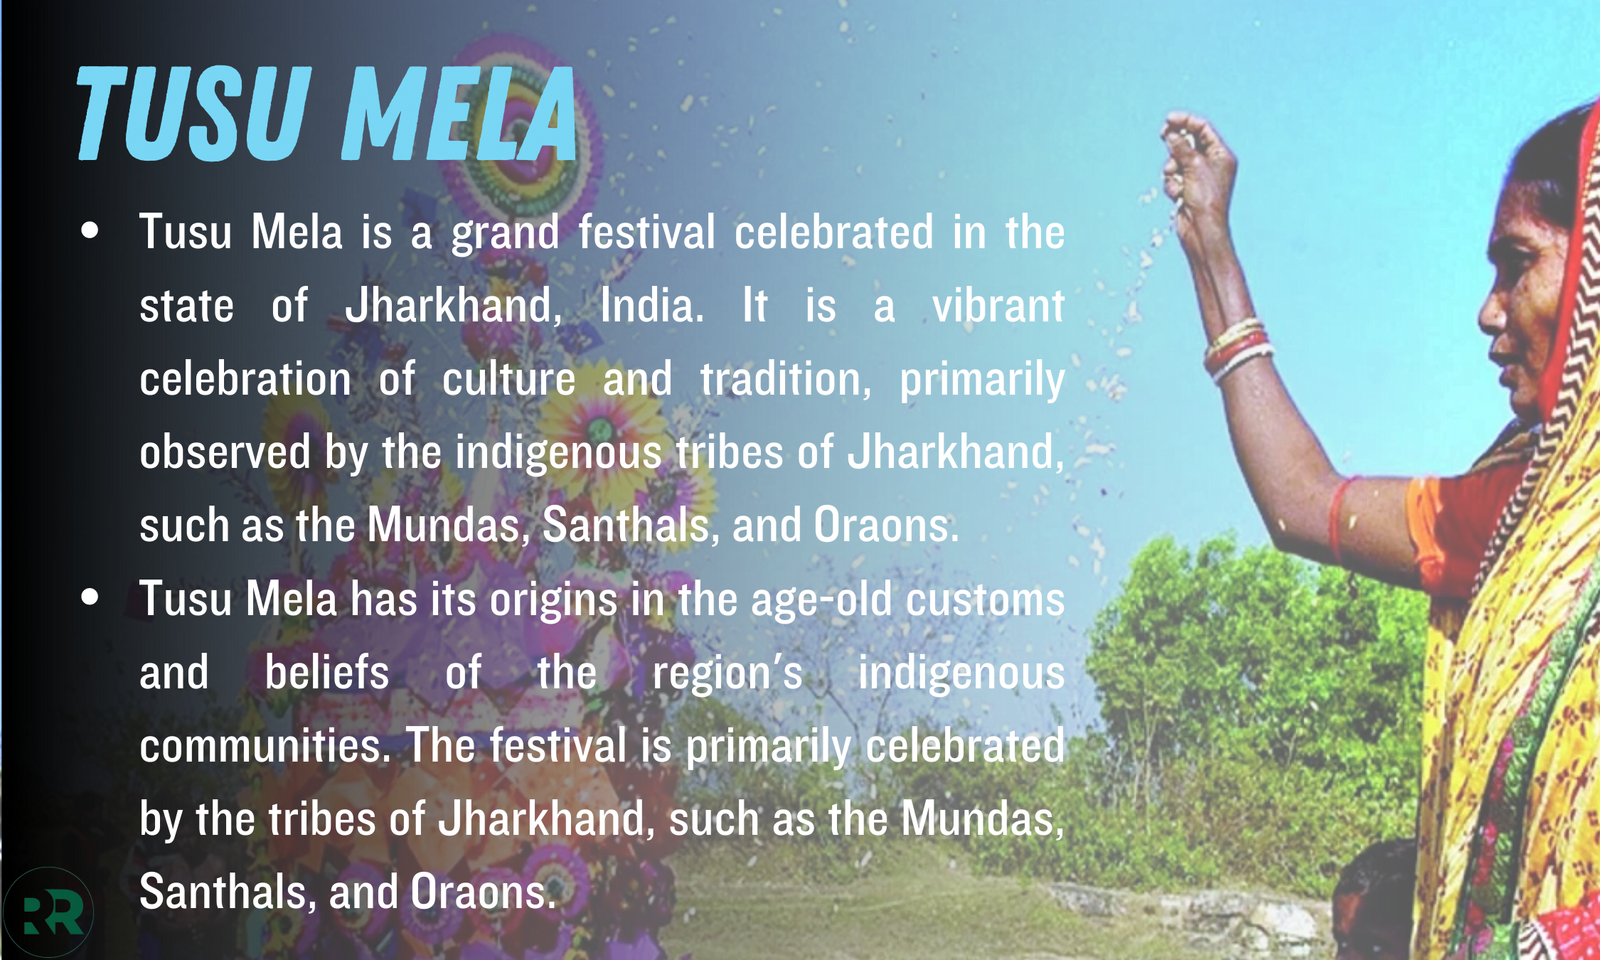 Tusu Mela: A Vibrant Celebration of Culture and Tradition in Jharkhand